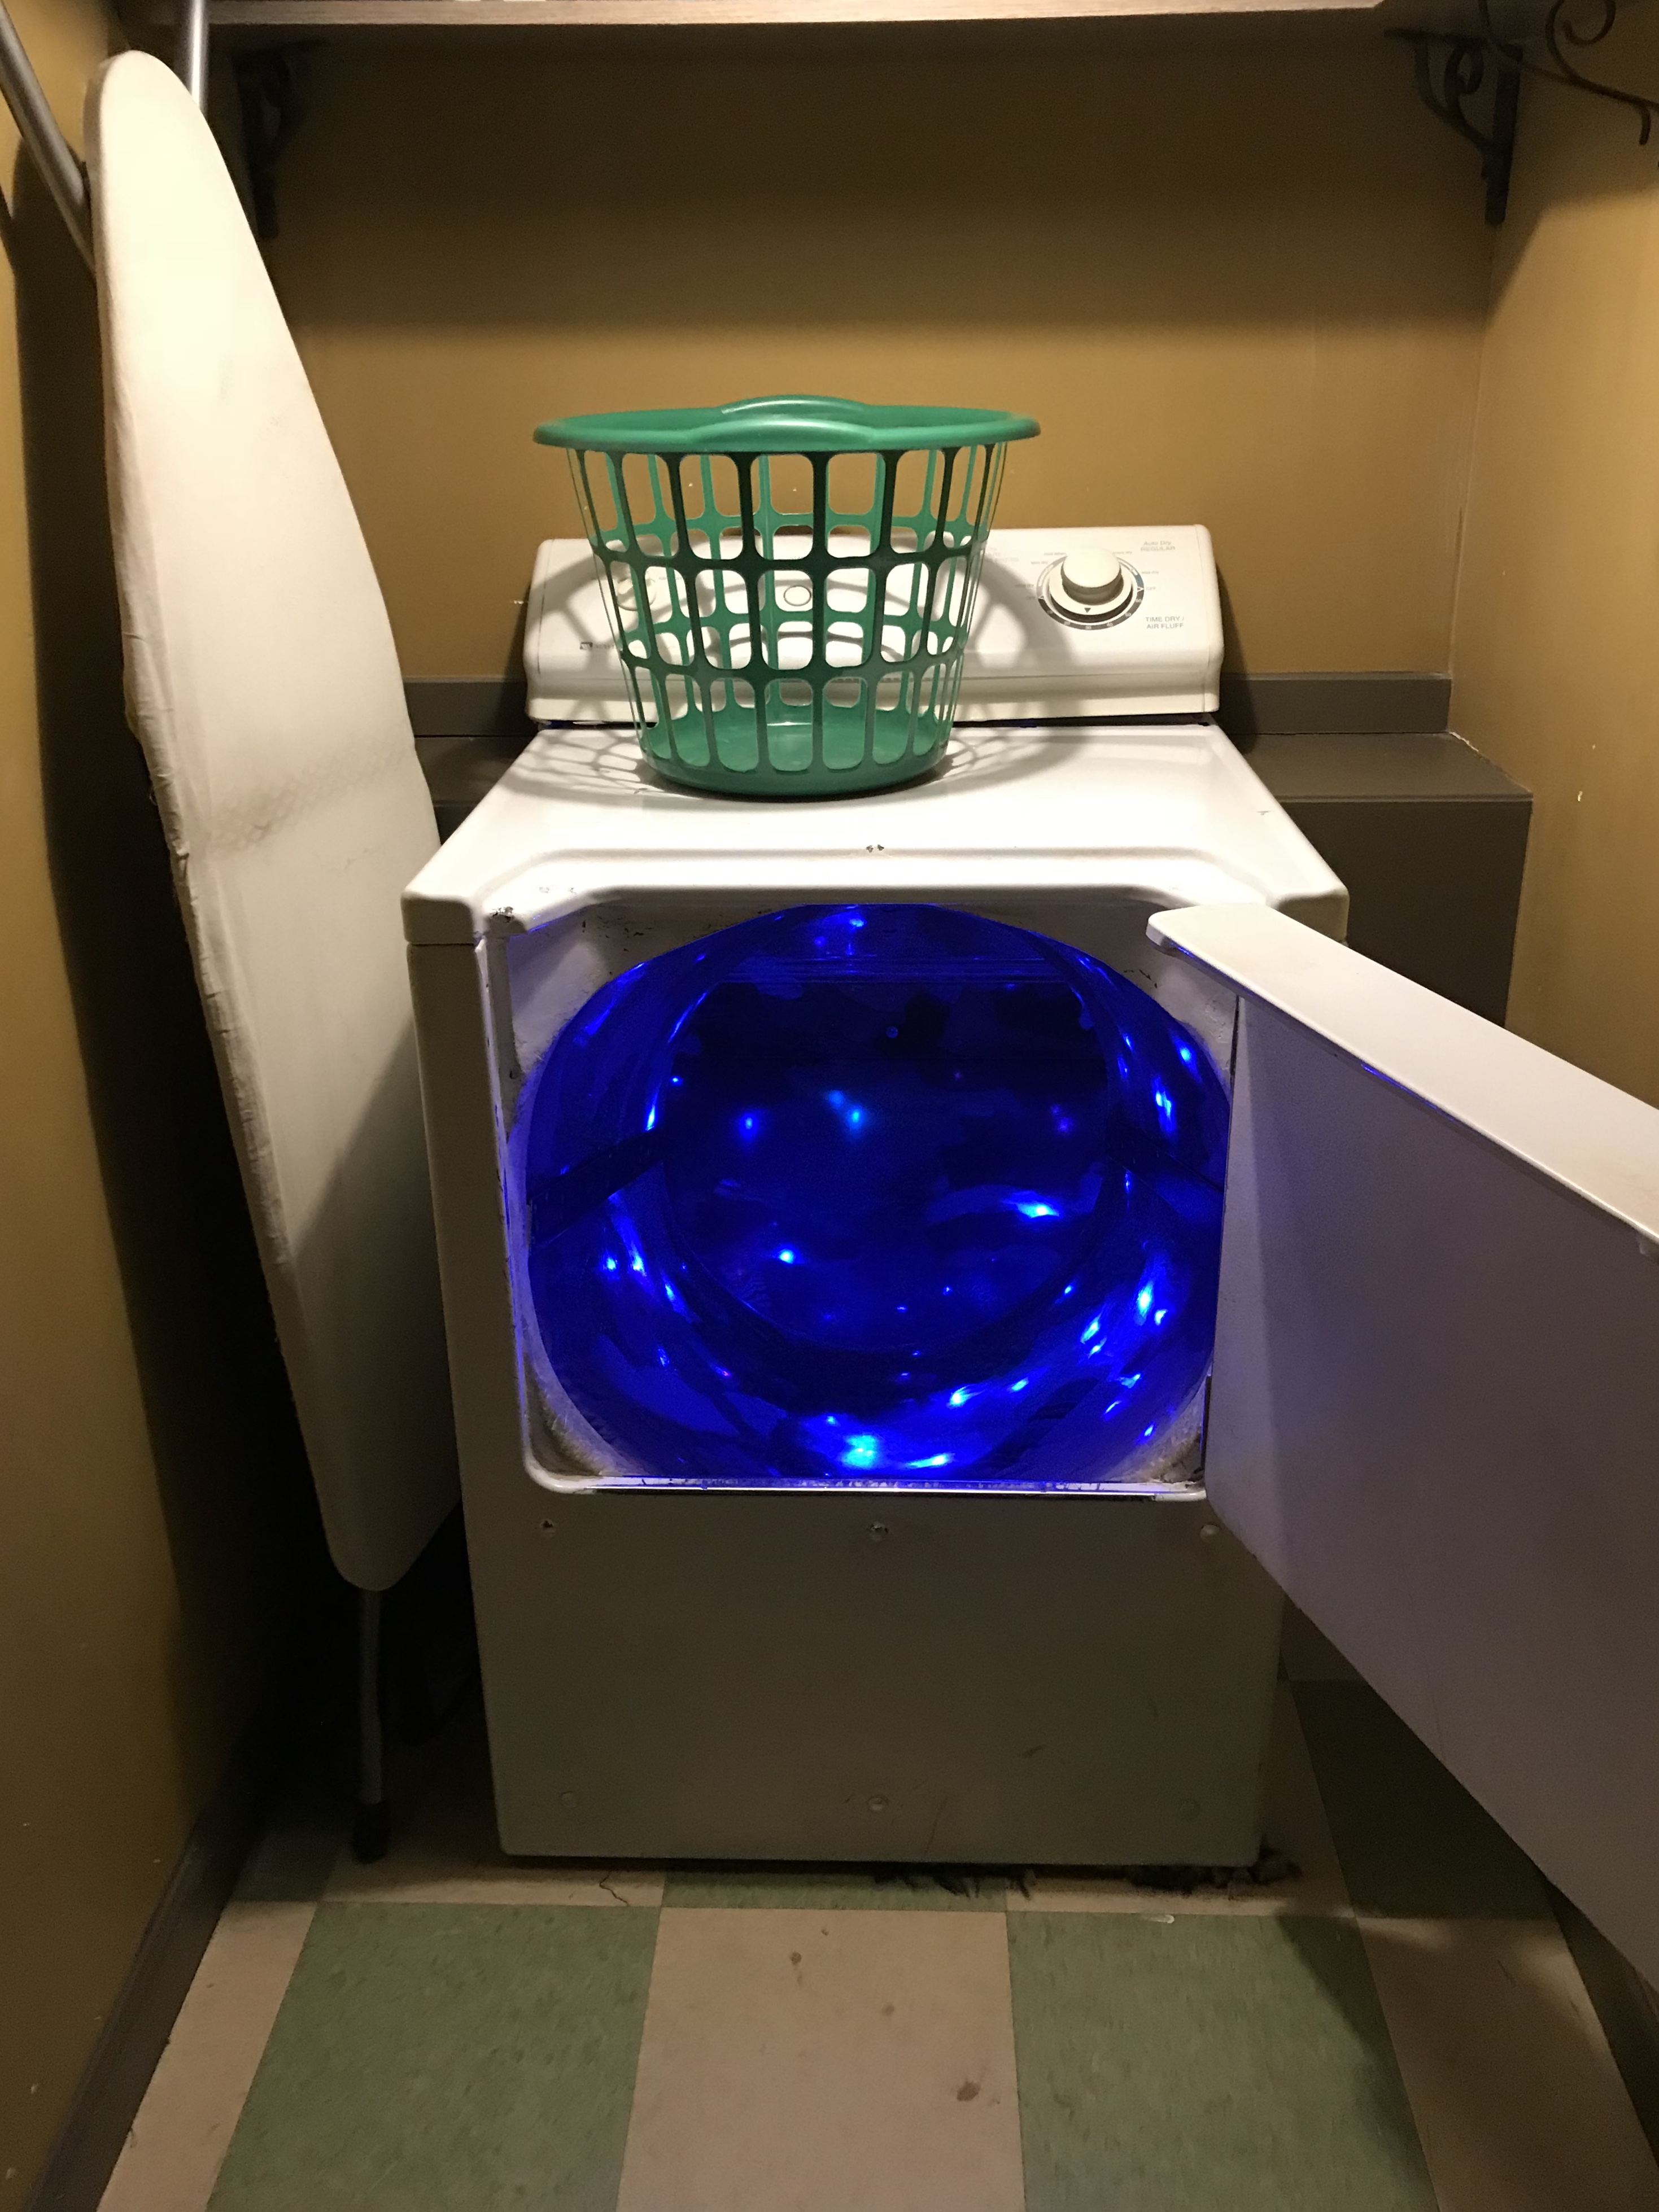 Picture of Washing Machine at Meow Wolf Sante Fe